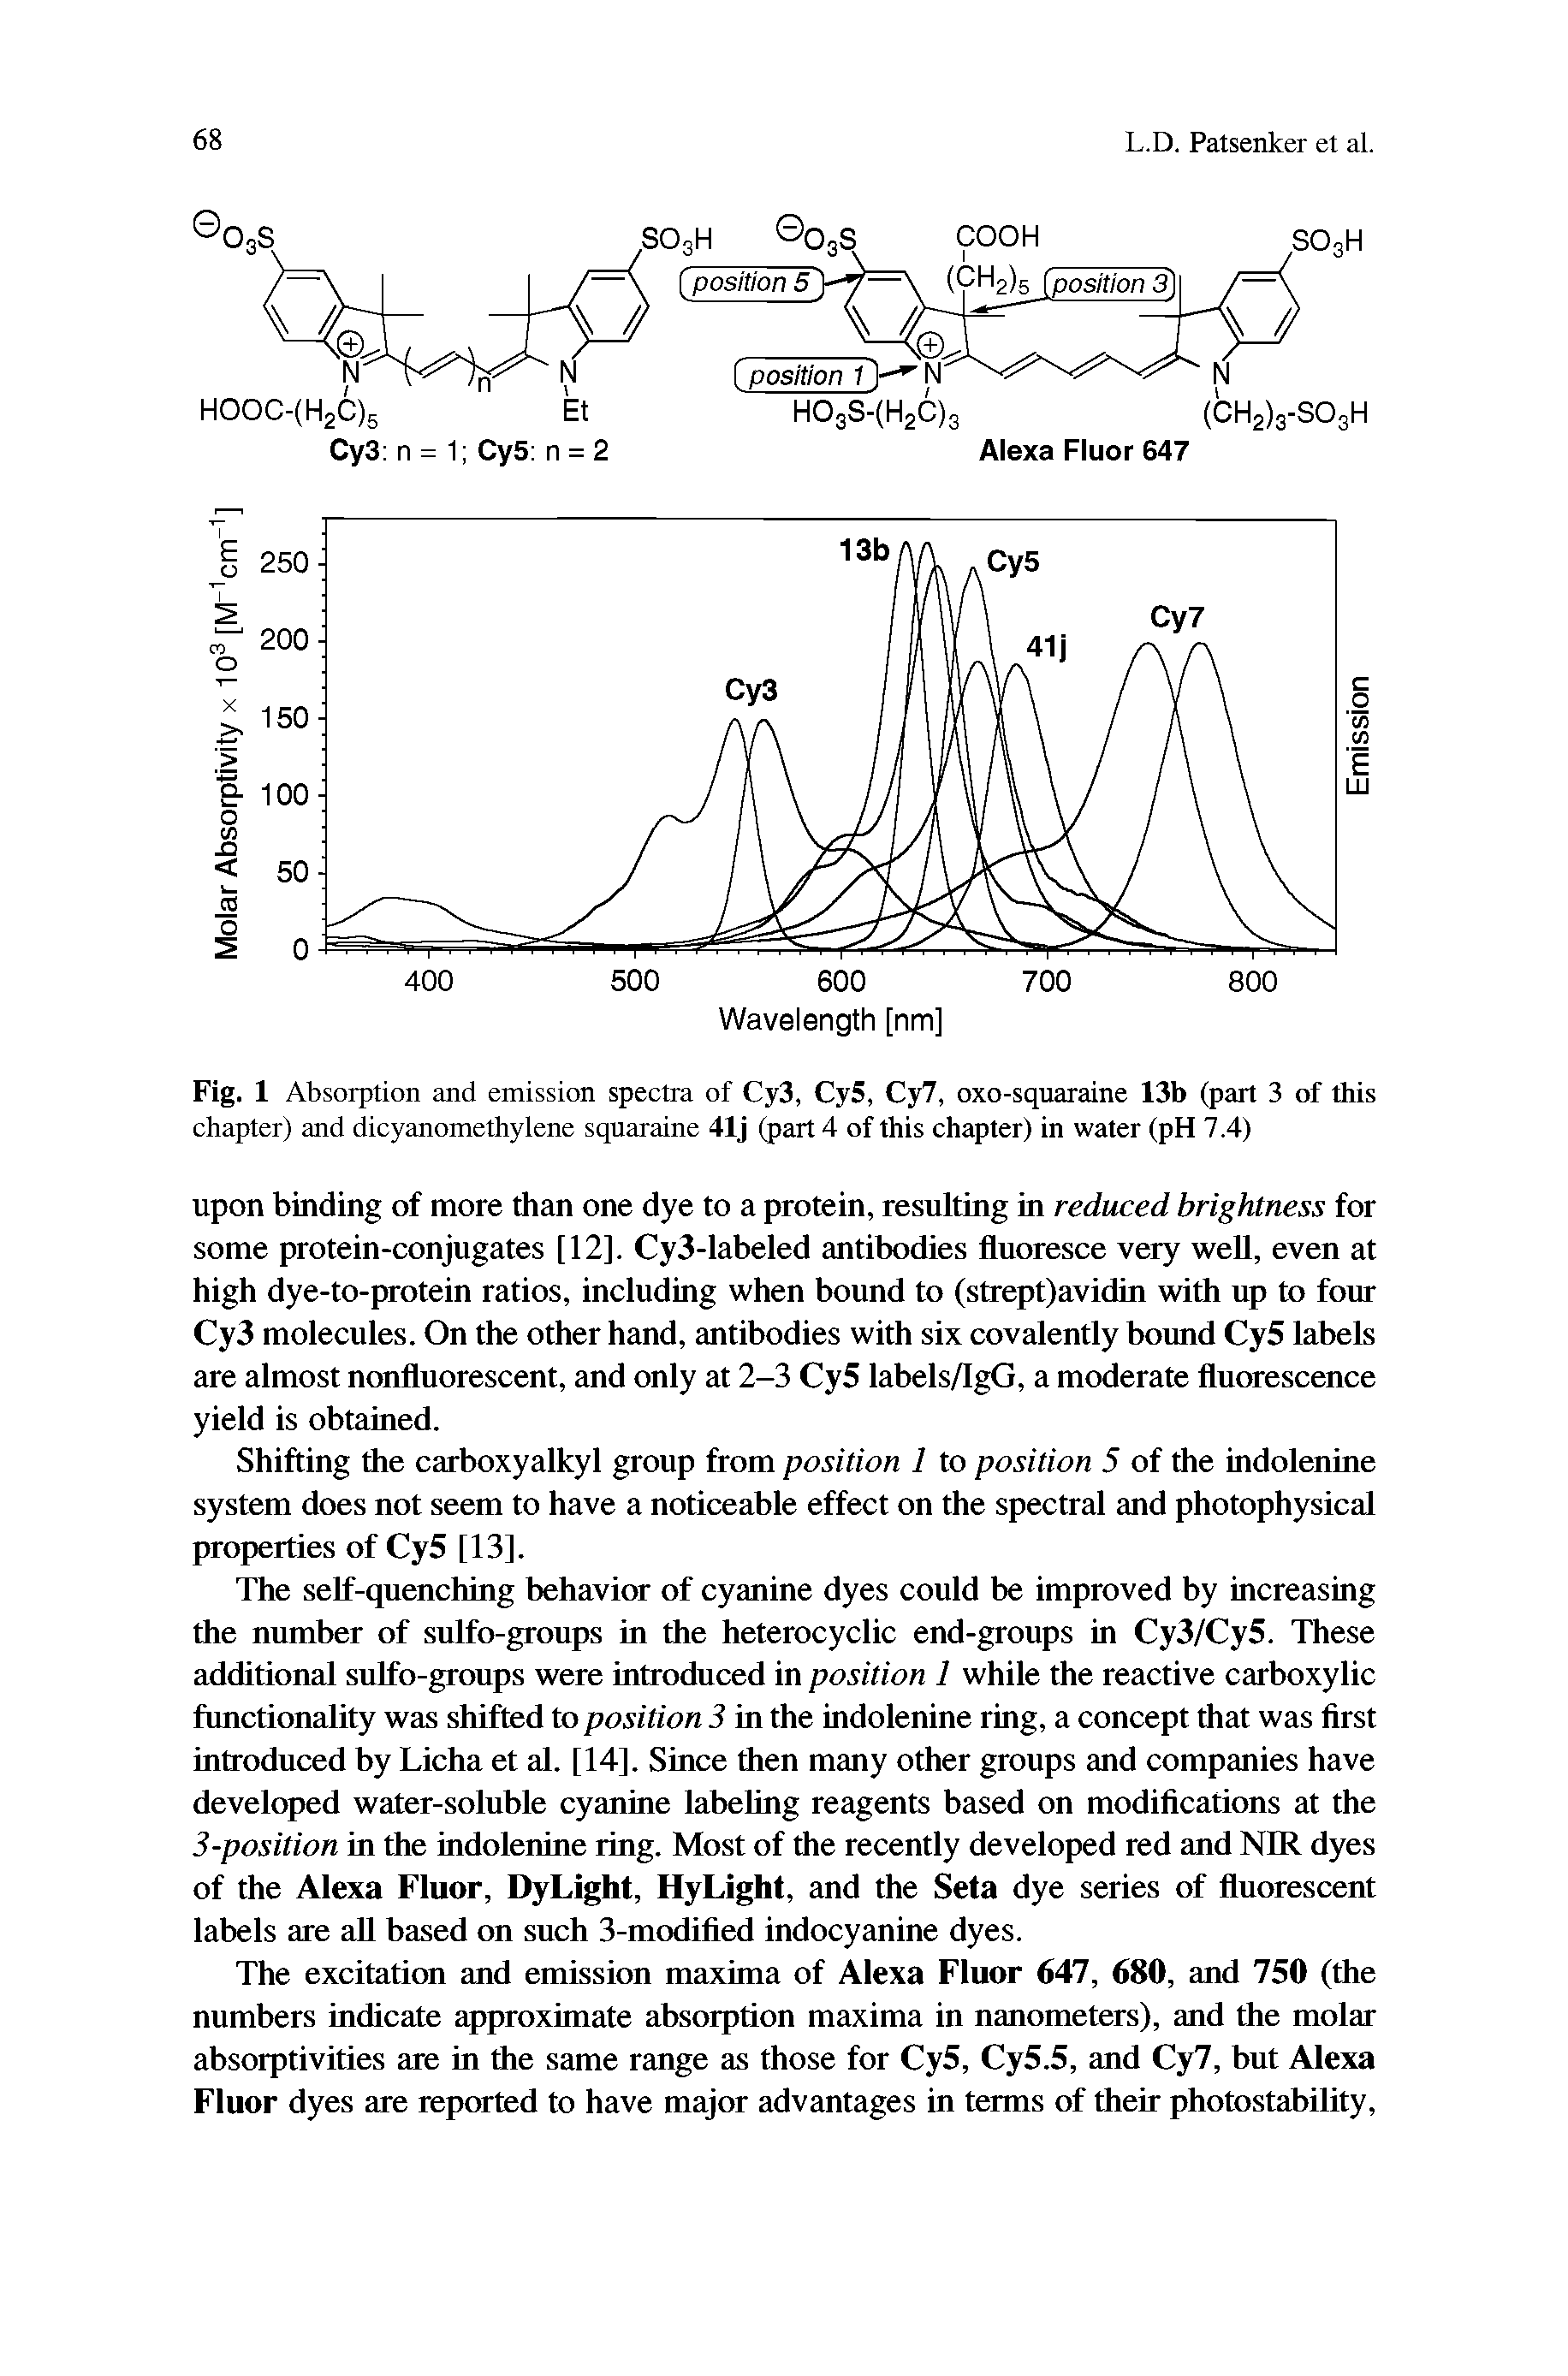 Fig. 1 Absorption and emission spectra of Cy3, CyS, Cy7, oxo-squaraine 13b (part 3 of this chapter) and dicyanomethylene squaraine 41j (part 4 of this chapter) in water (pH 7.4)...